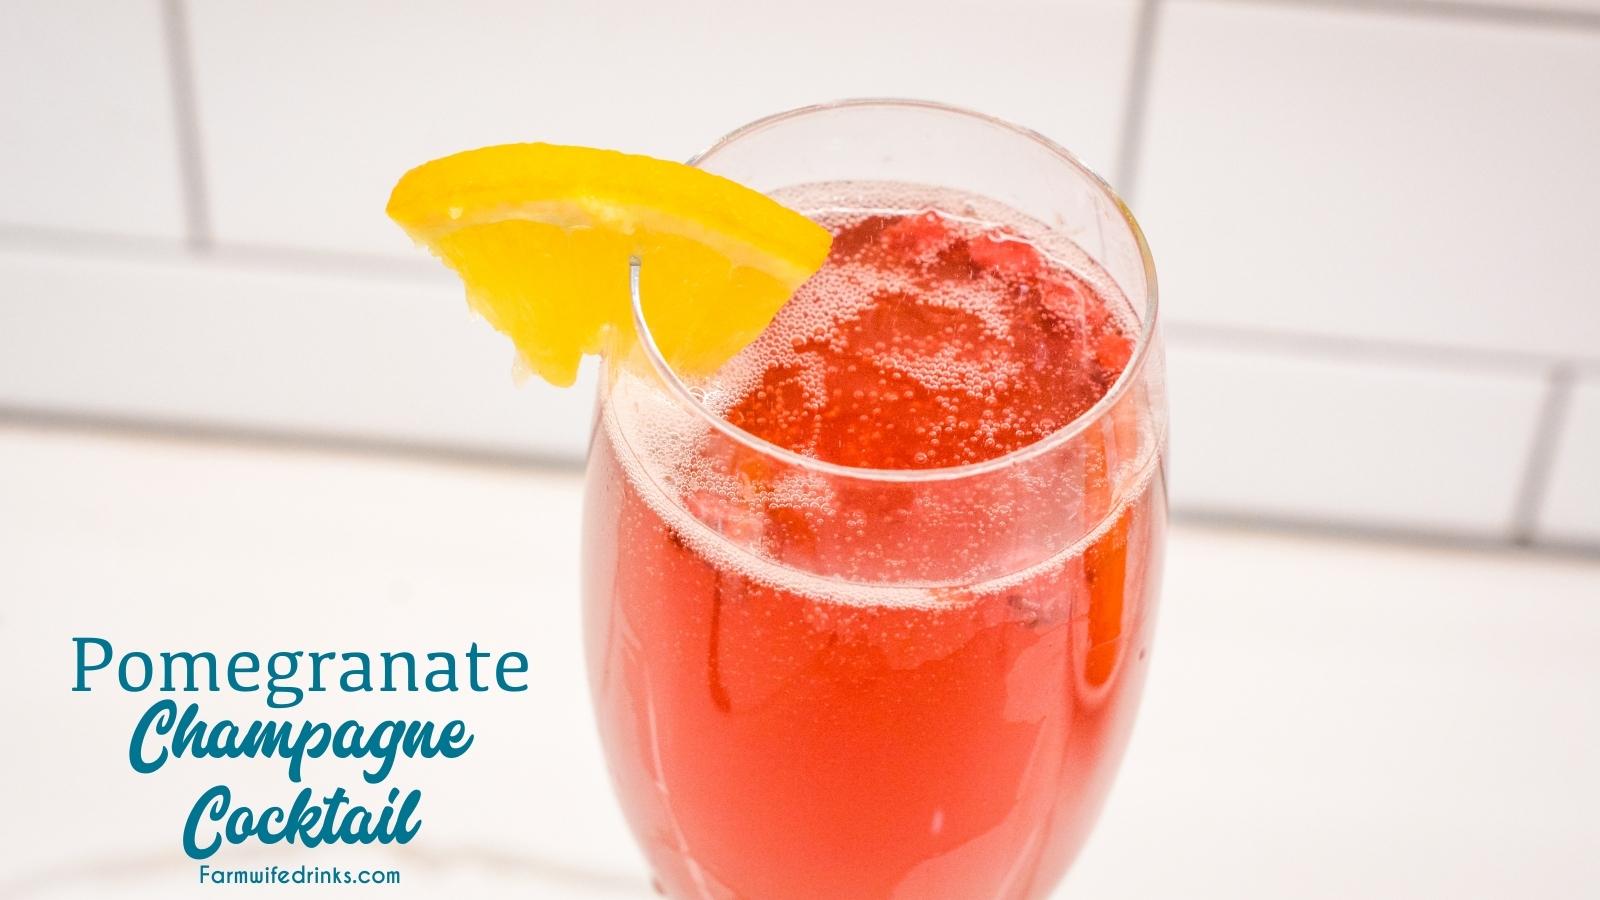 This orange pomegranate champagne spritzer is just that easy fancy champagne cocktail you need to know how to make for celebrations.